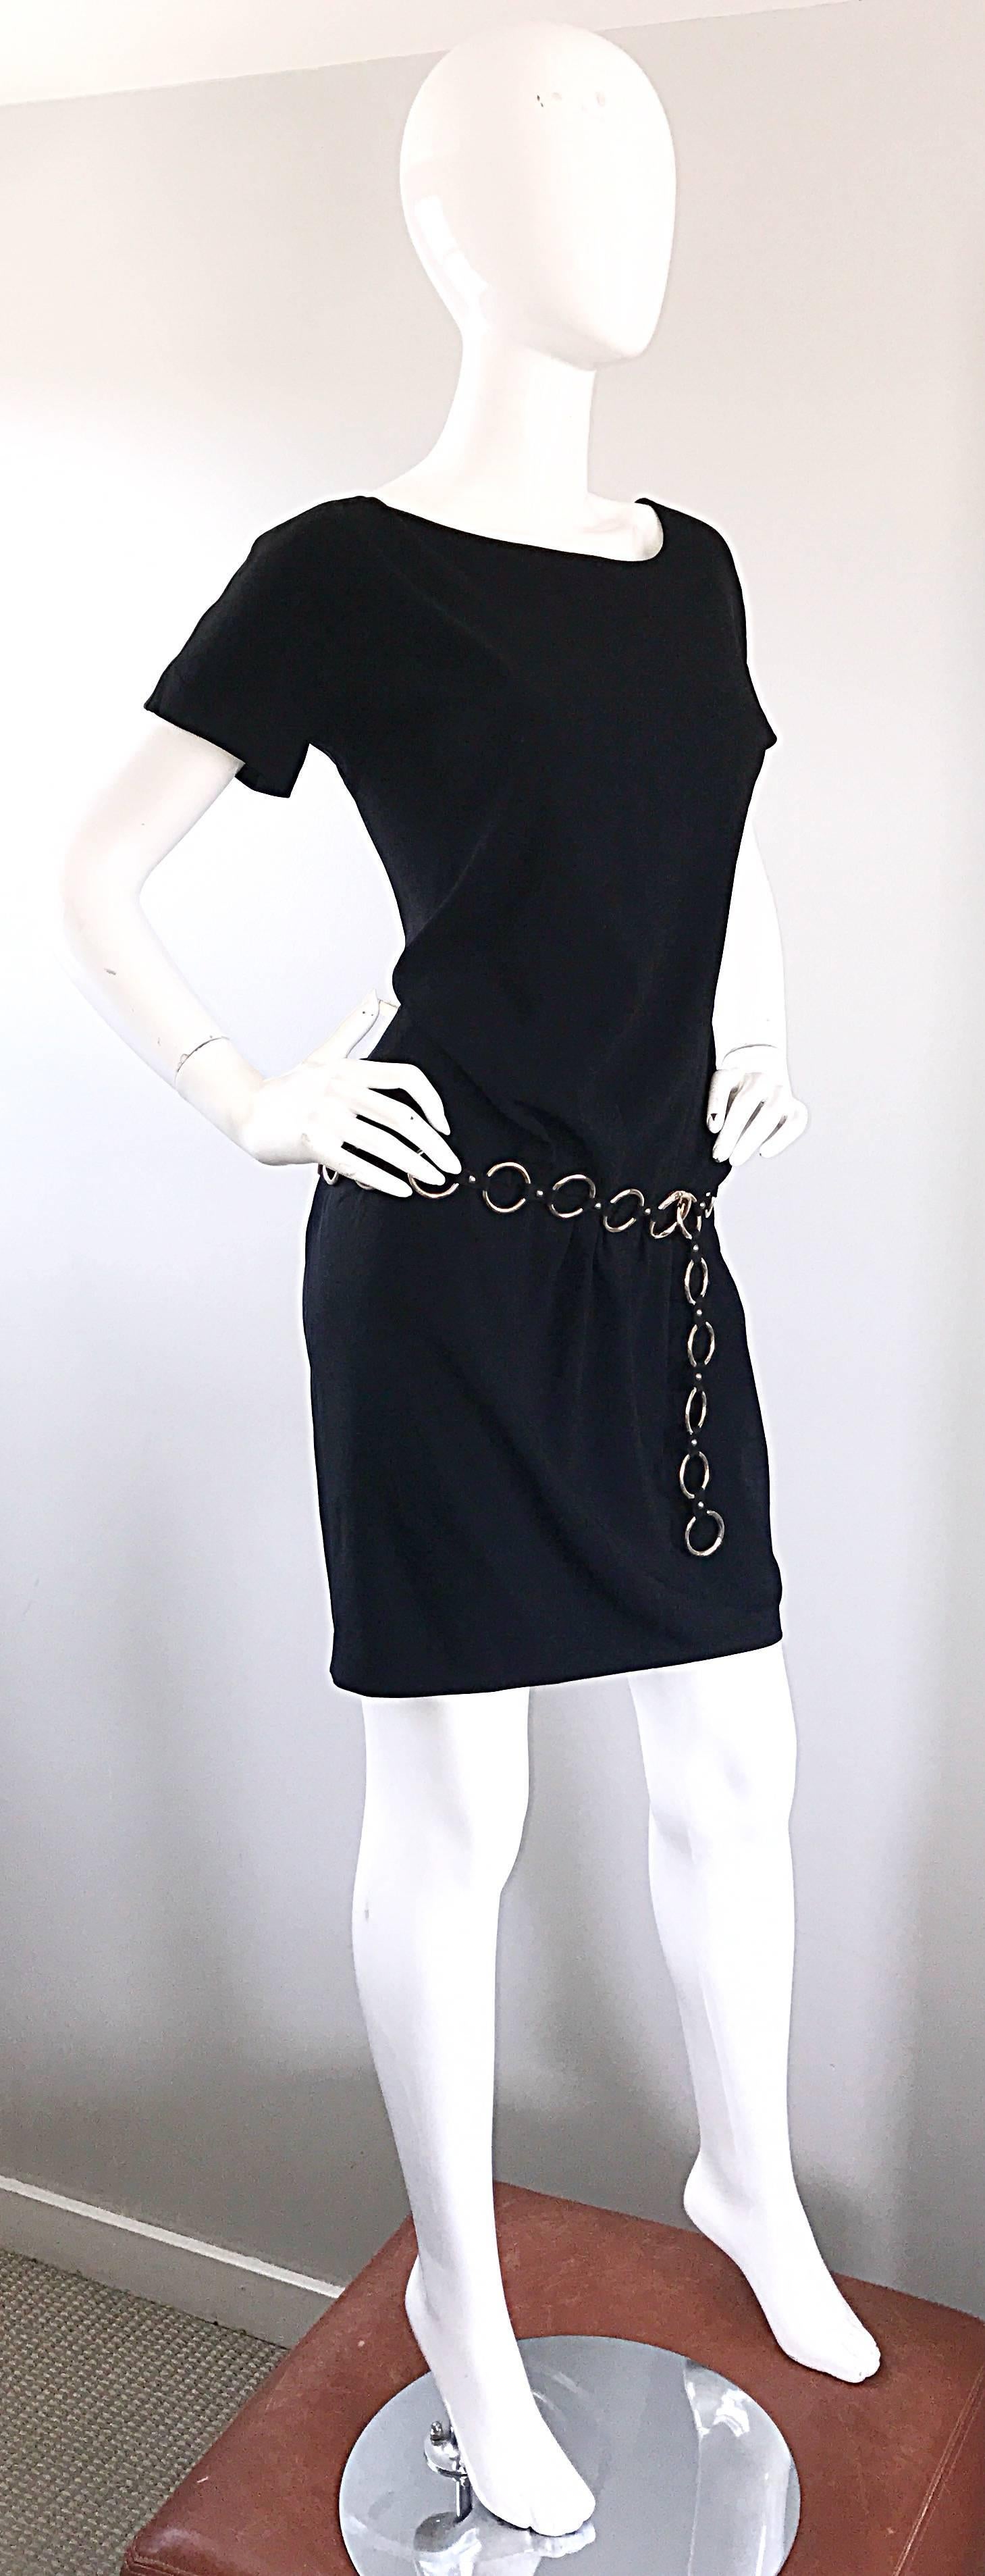 Women's 1990s Moschino Cheap & Chic Black Silver Chain Loop Belt Vintage Dress Size 6  For Sale